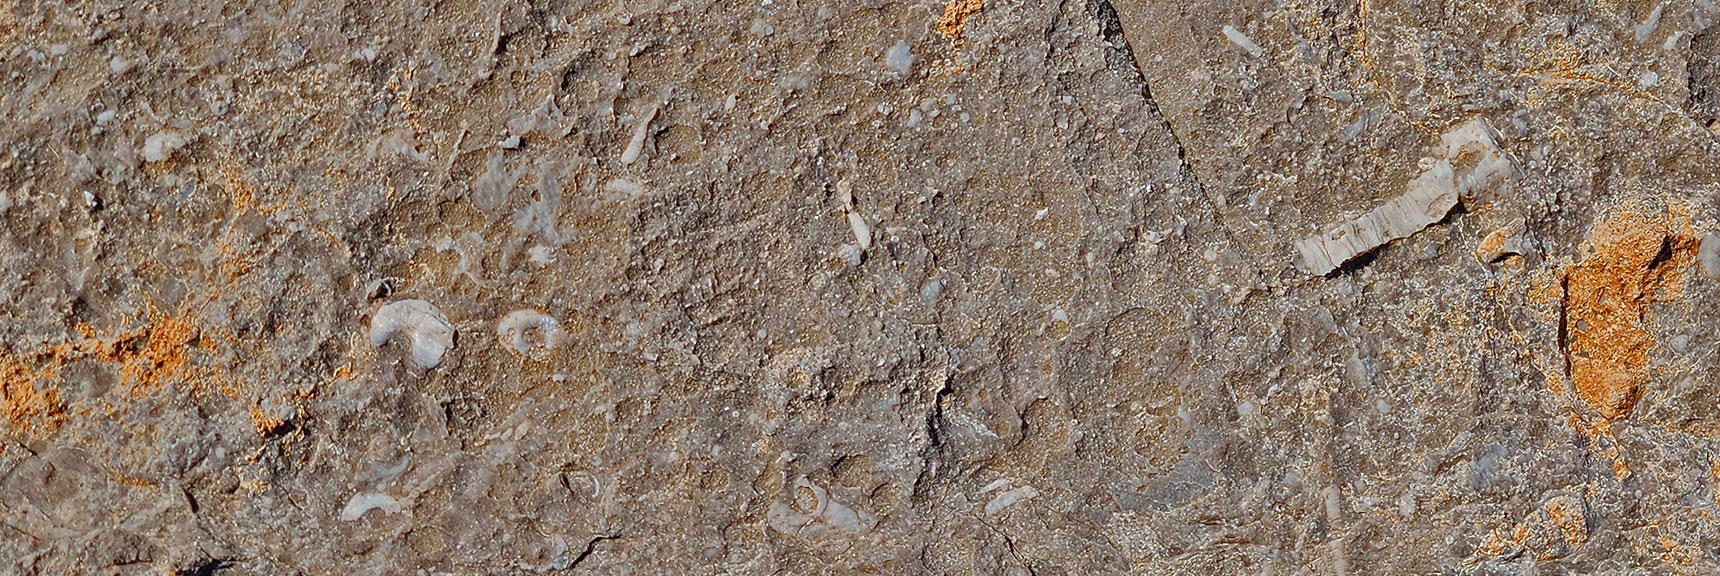 More Fossils on the Upper Eastern Ridge | Eastern Outer Circuit | Blue Diamond Hill | Red Rock Canyon, Nevada